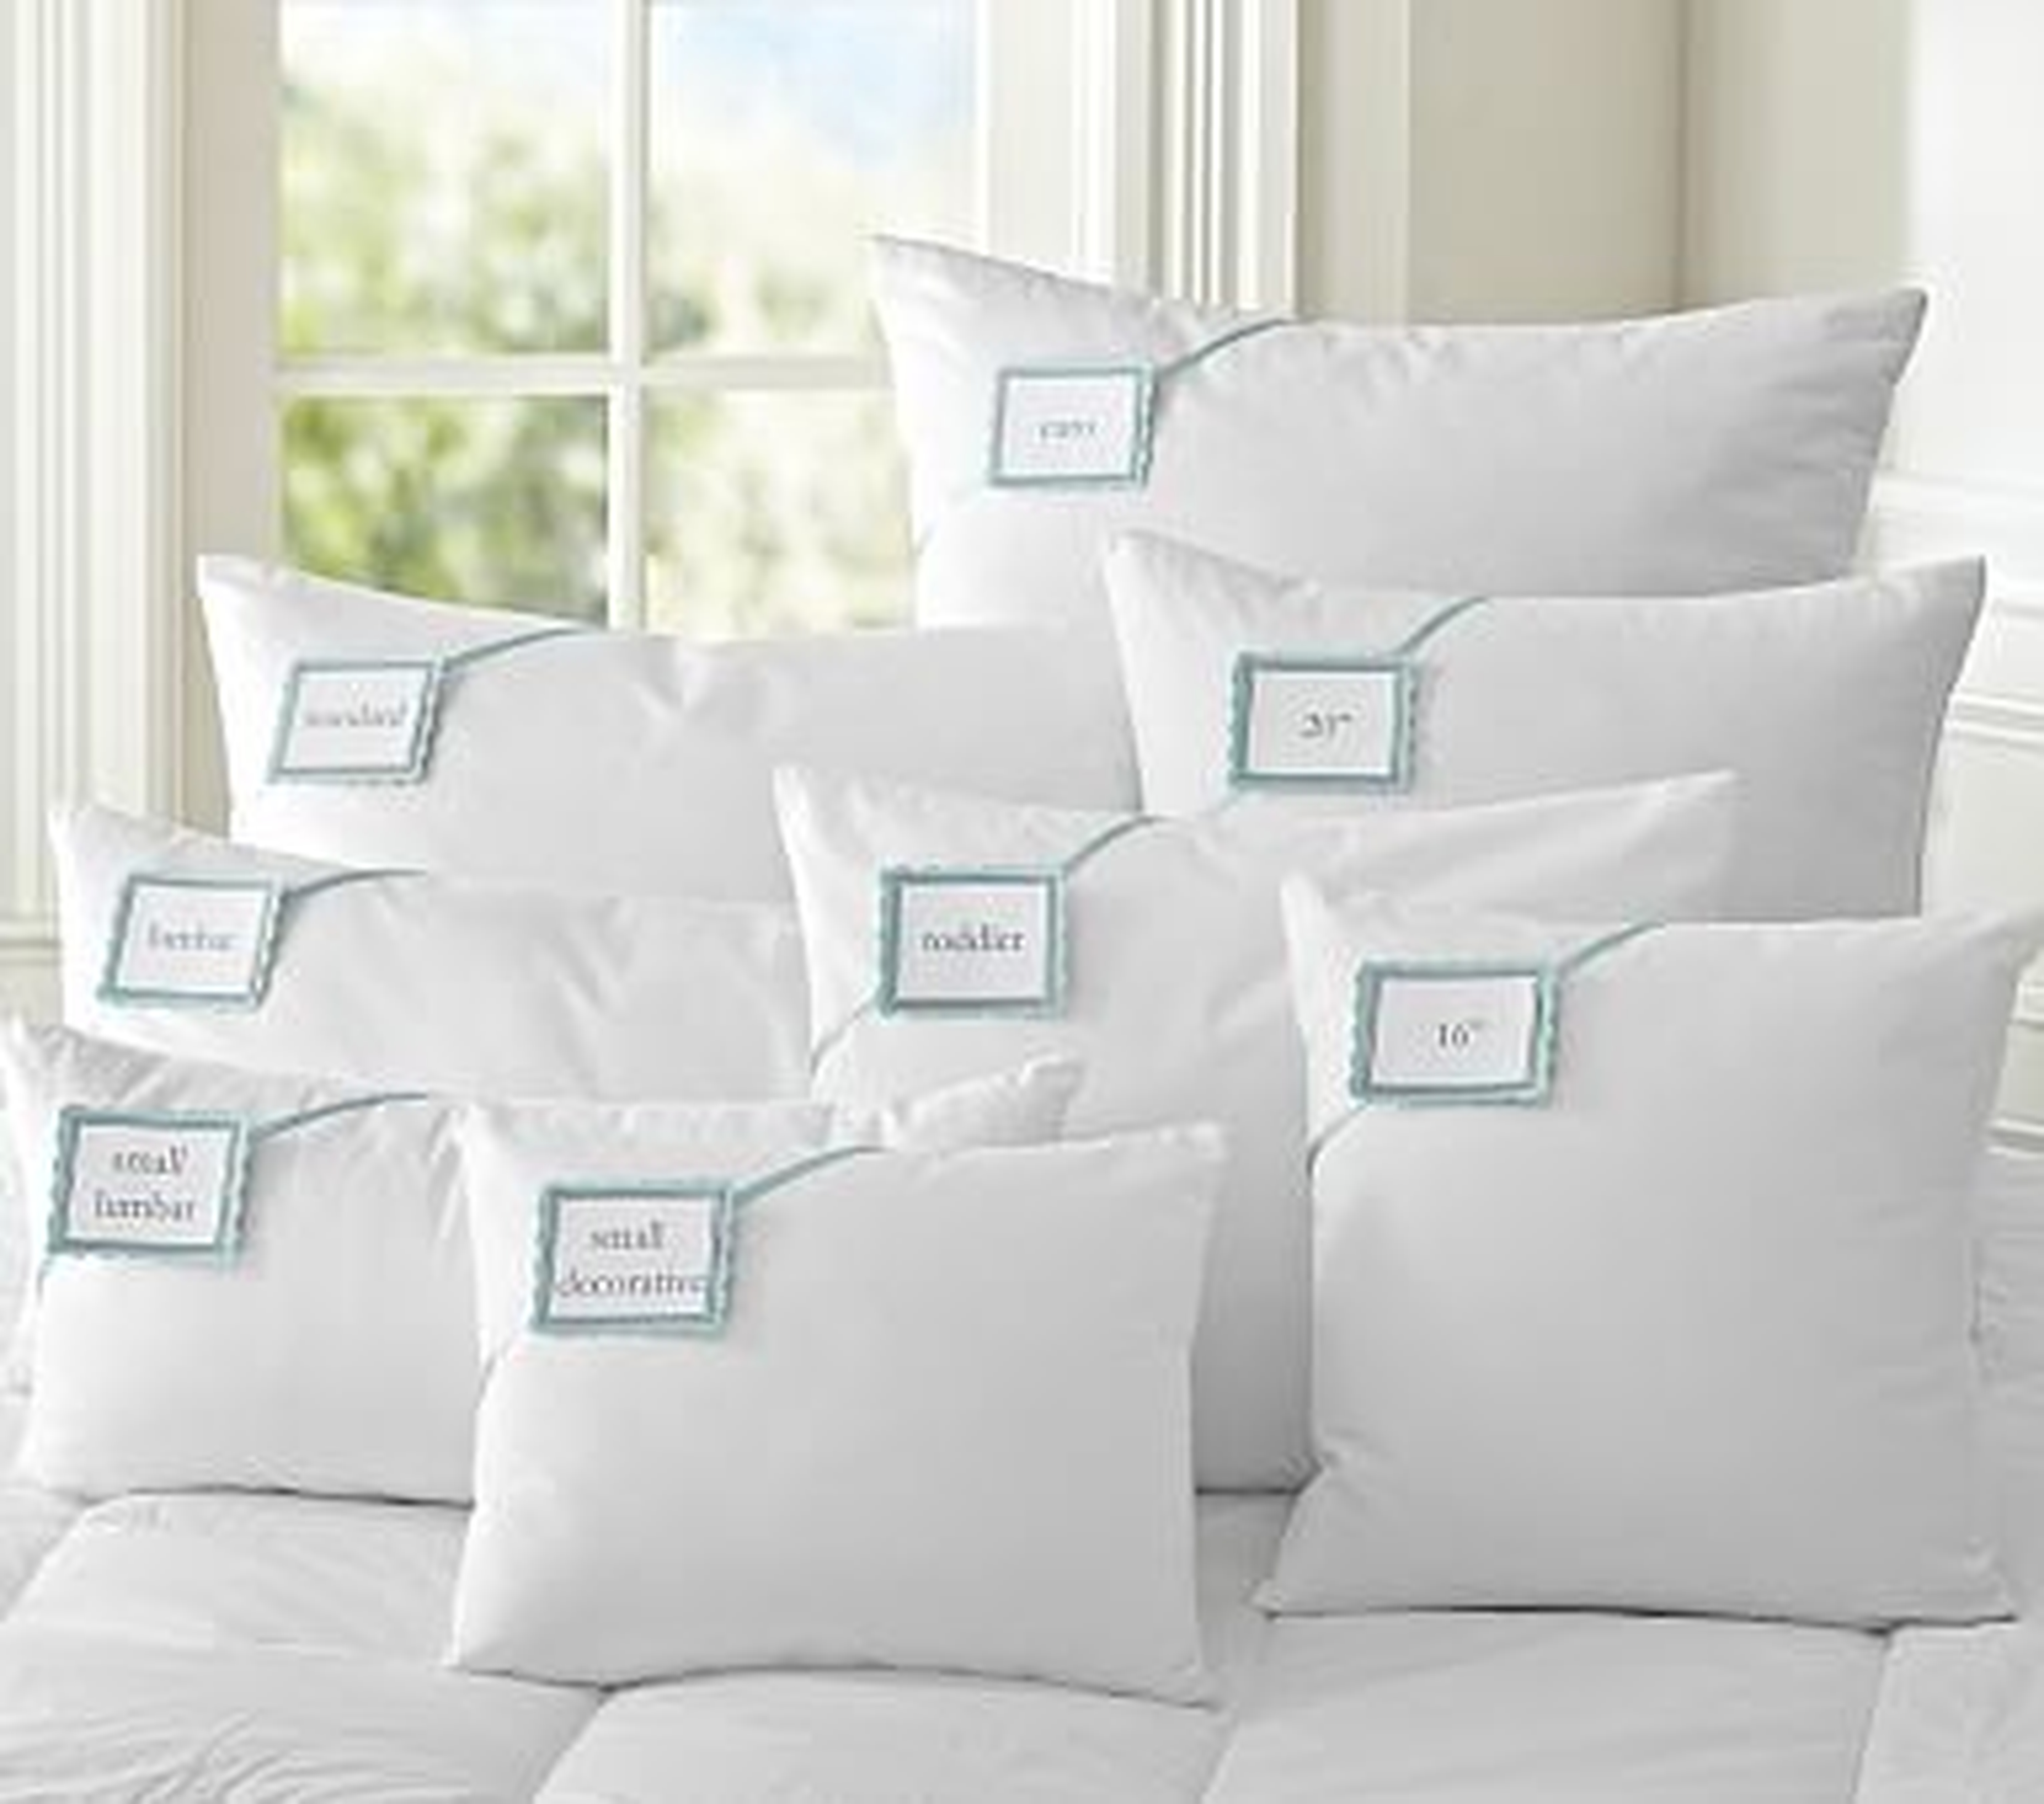 Synthetic Pillow Insert, 12x24 In, White - Pottery Barn Kids